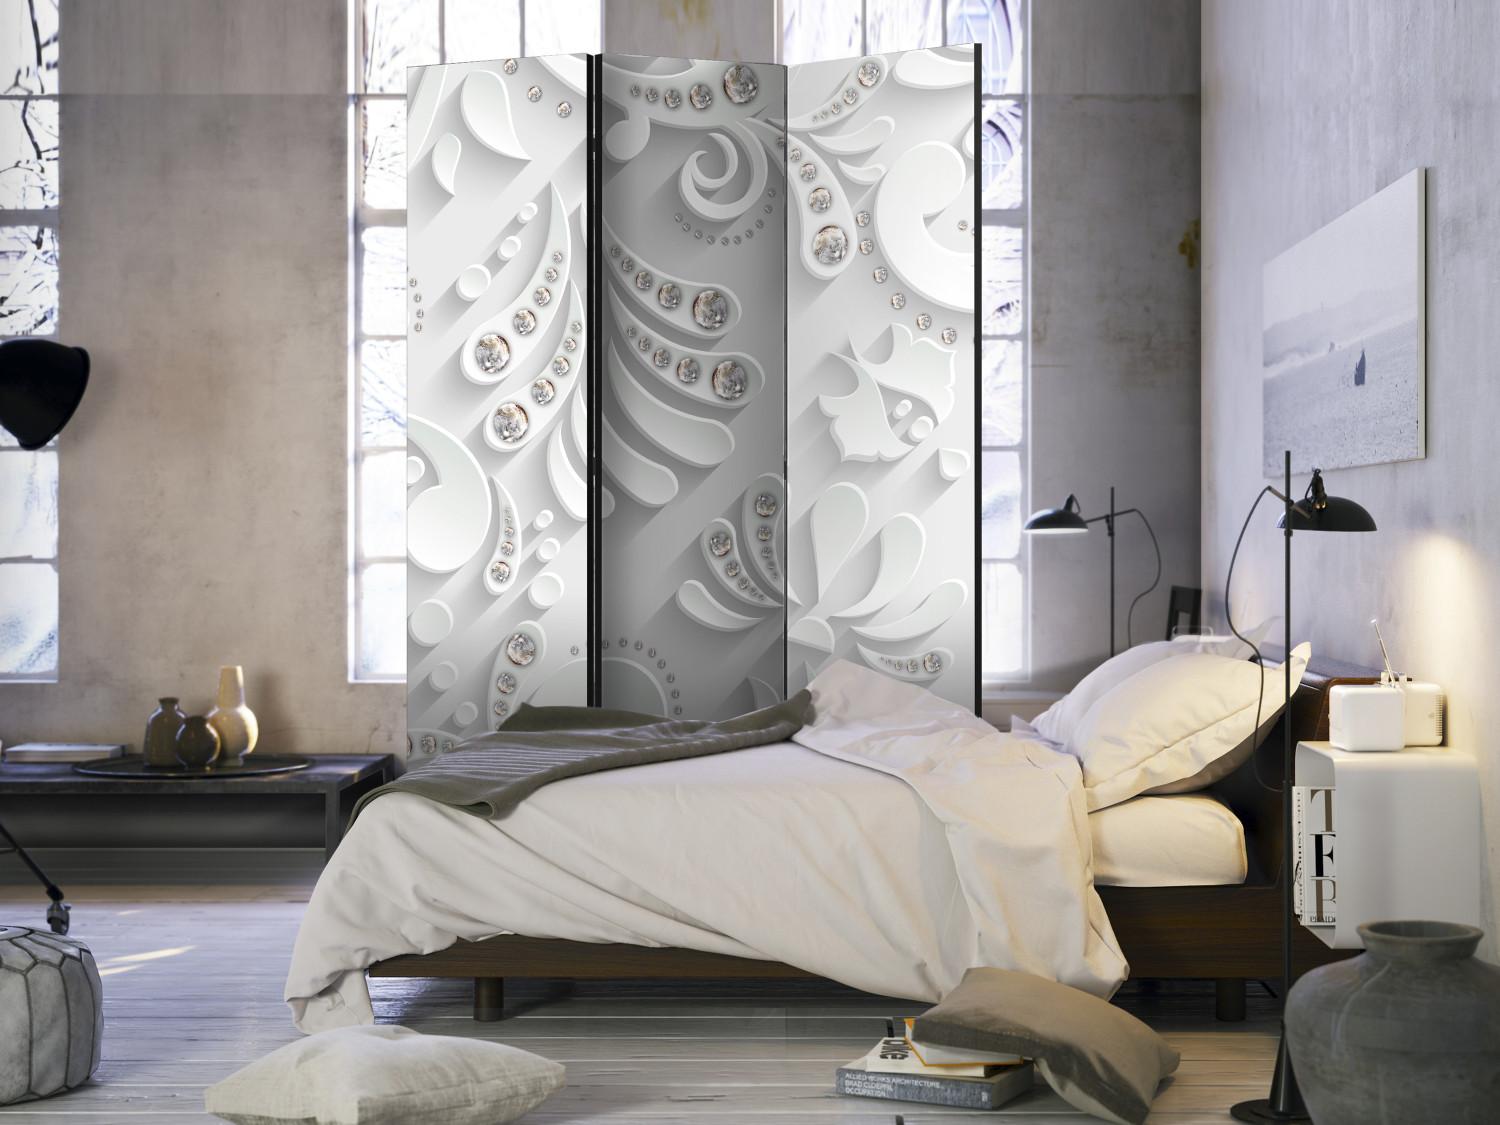 Biombo barato Flowers in Crystals [Room Dividers]